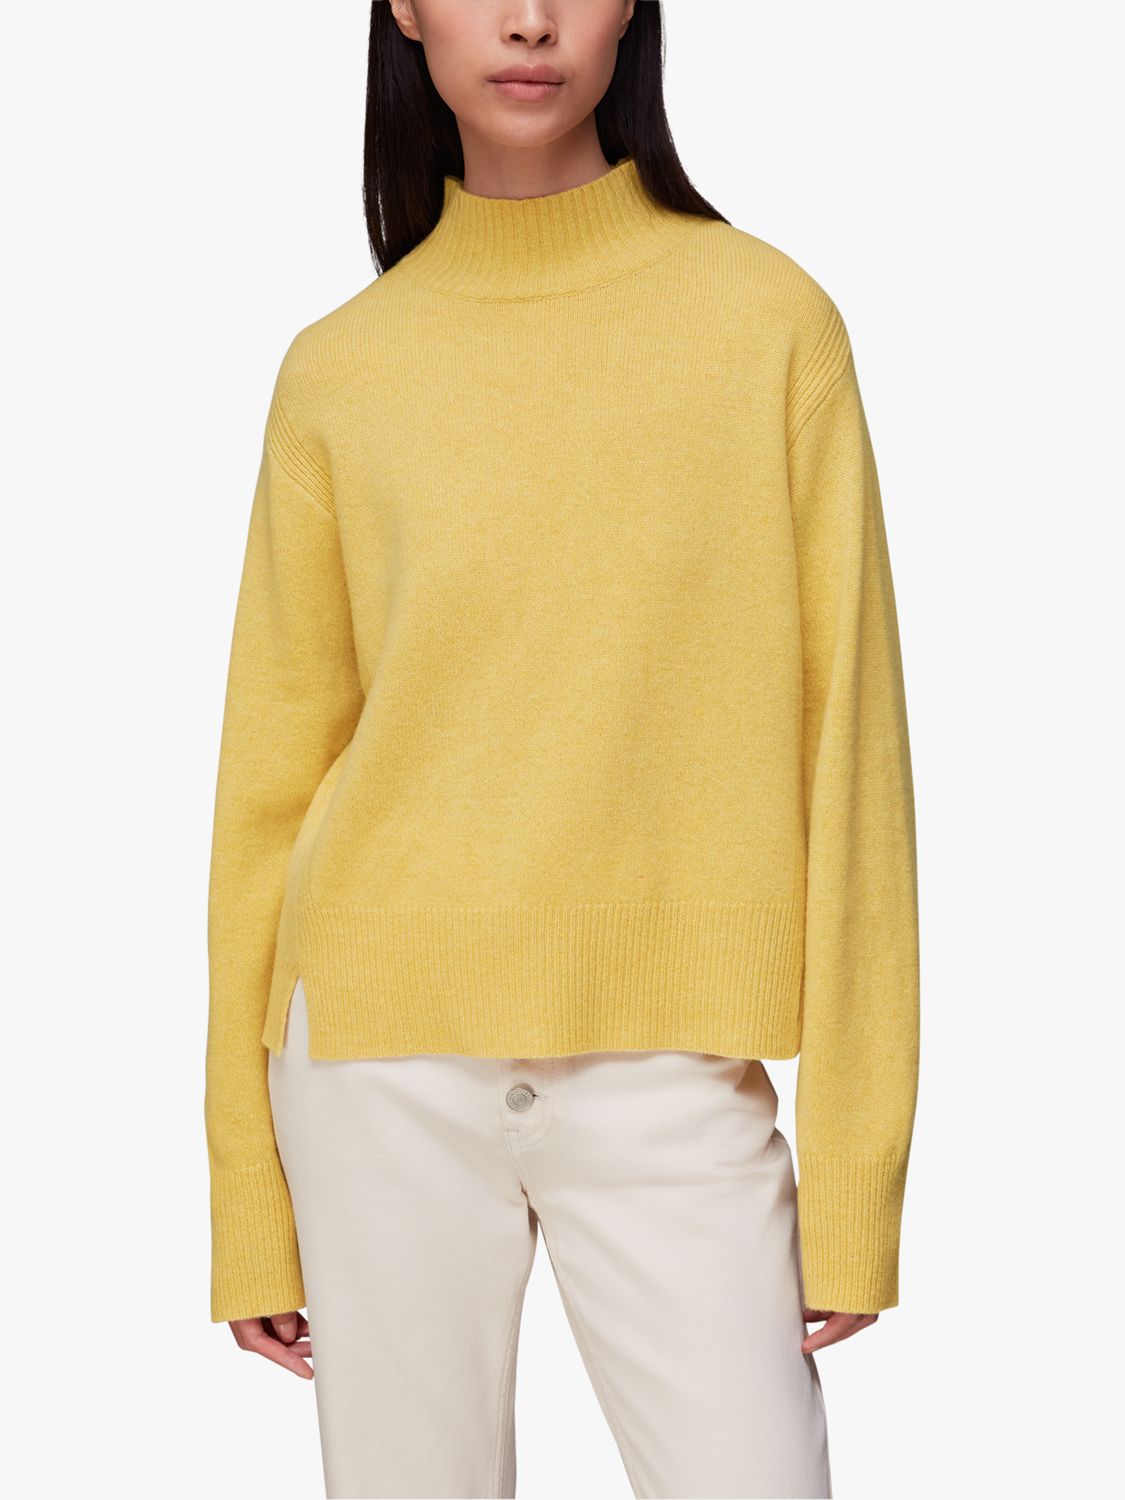 Whistles Ferne Wool Funnel Neck Jumper, Yellow at John Lewis & Partners